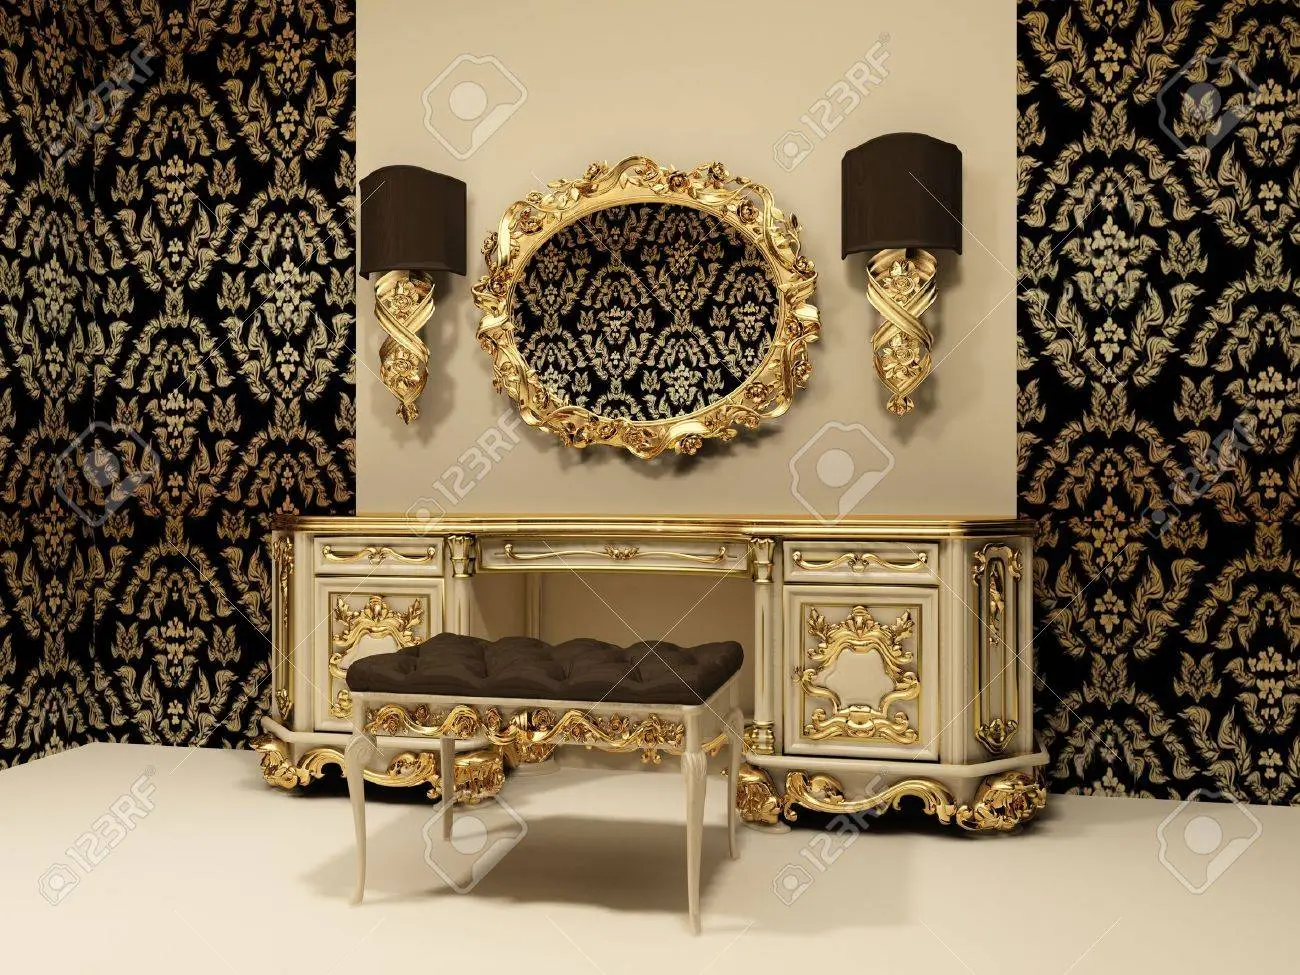 Baroque table with mirror on the wallpaper background with ornament stock photo picture and royalty free image image